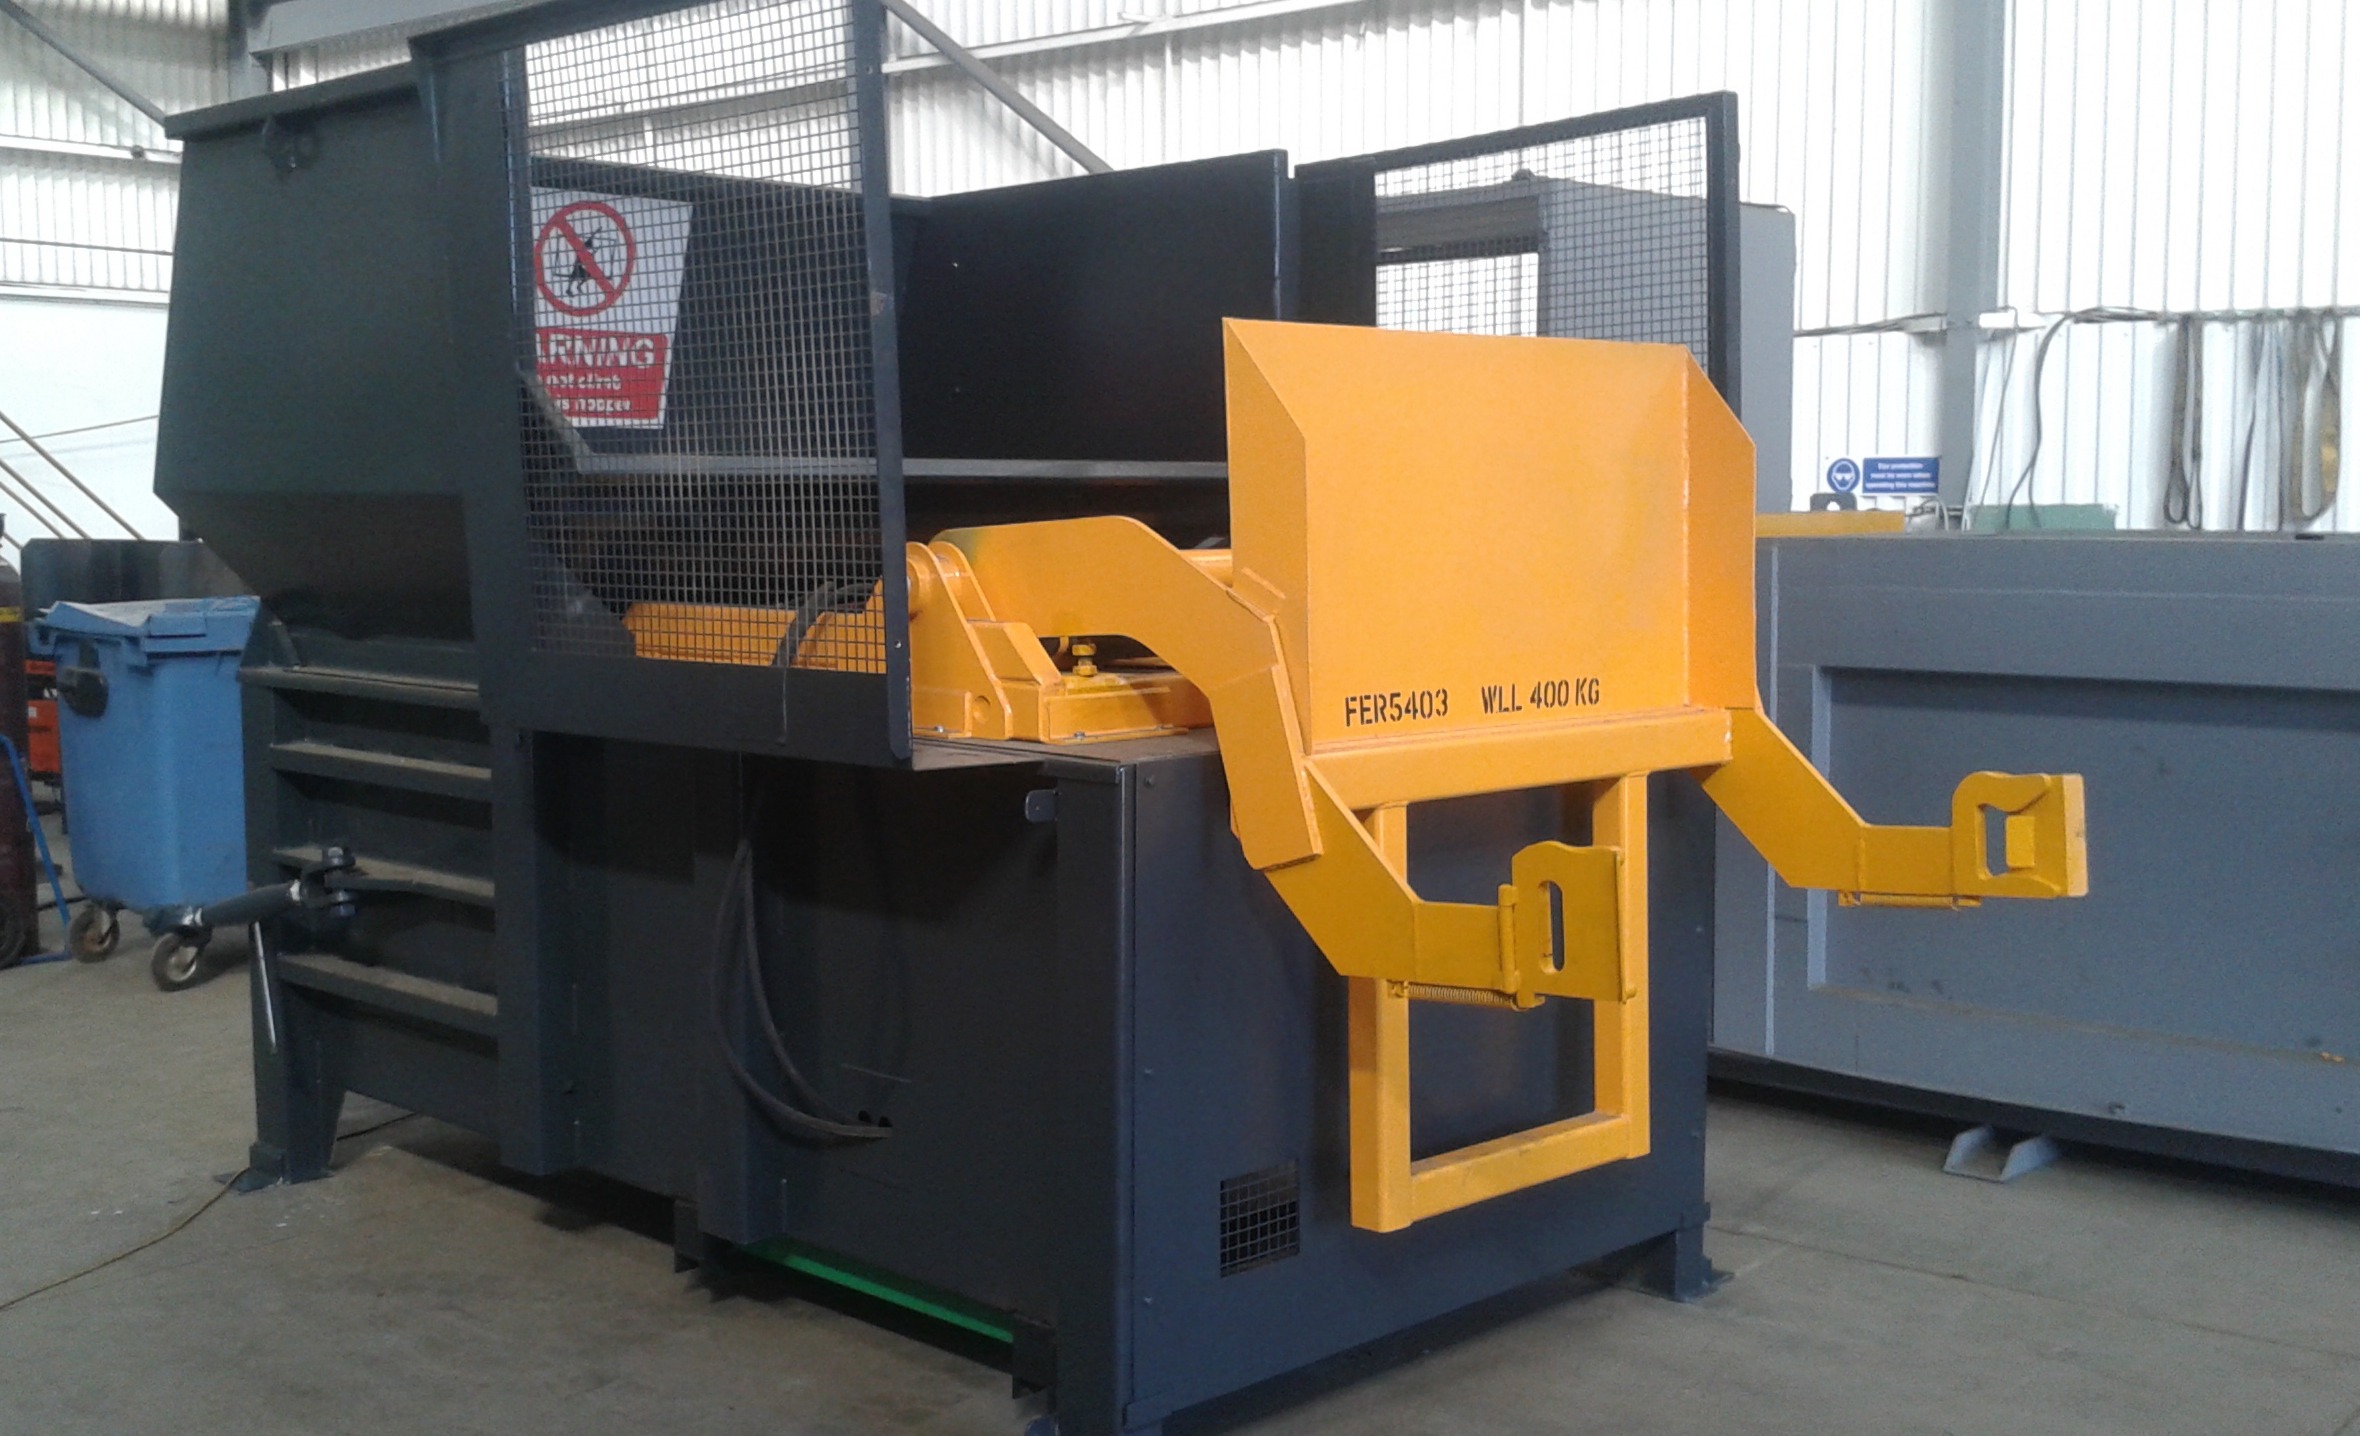 XXL Heavy Duty Double Screw Compactor without Feeding Device (ENRDS/WFD/HD/ XXL), Waste Handling Equipment